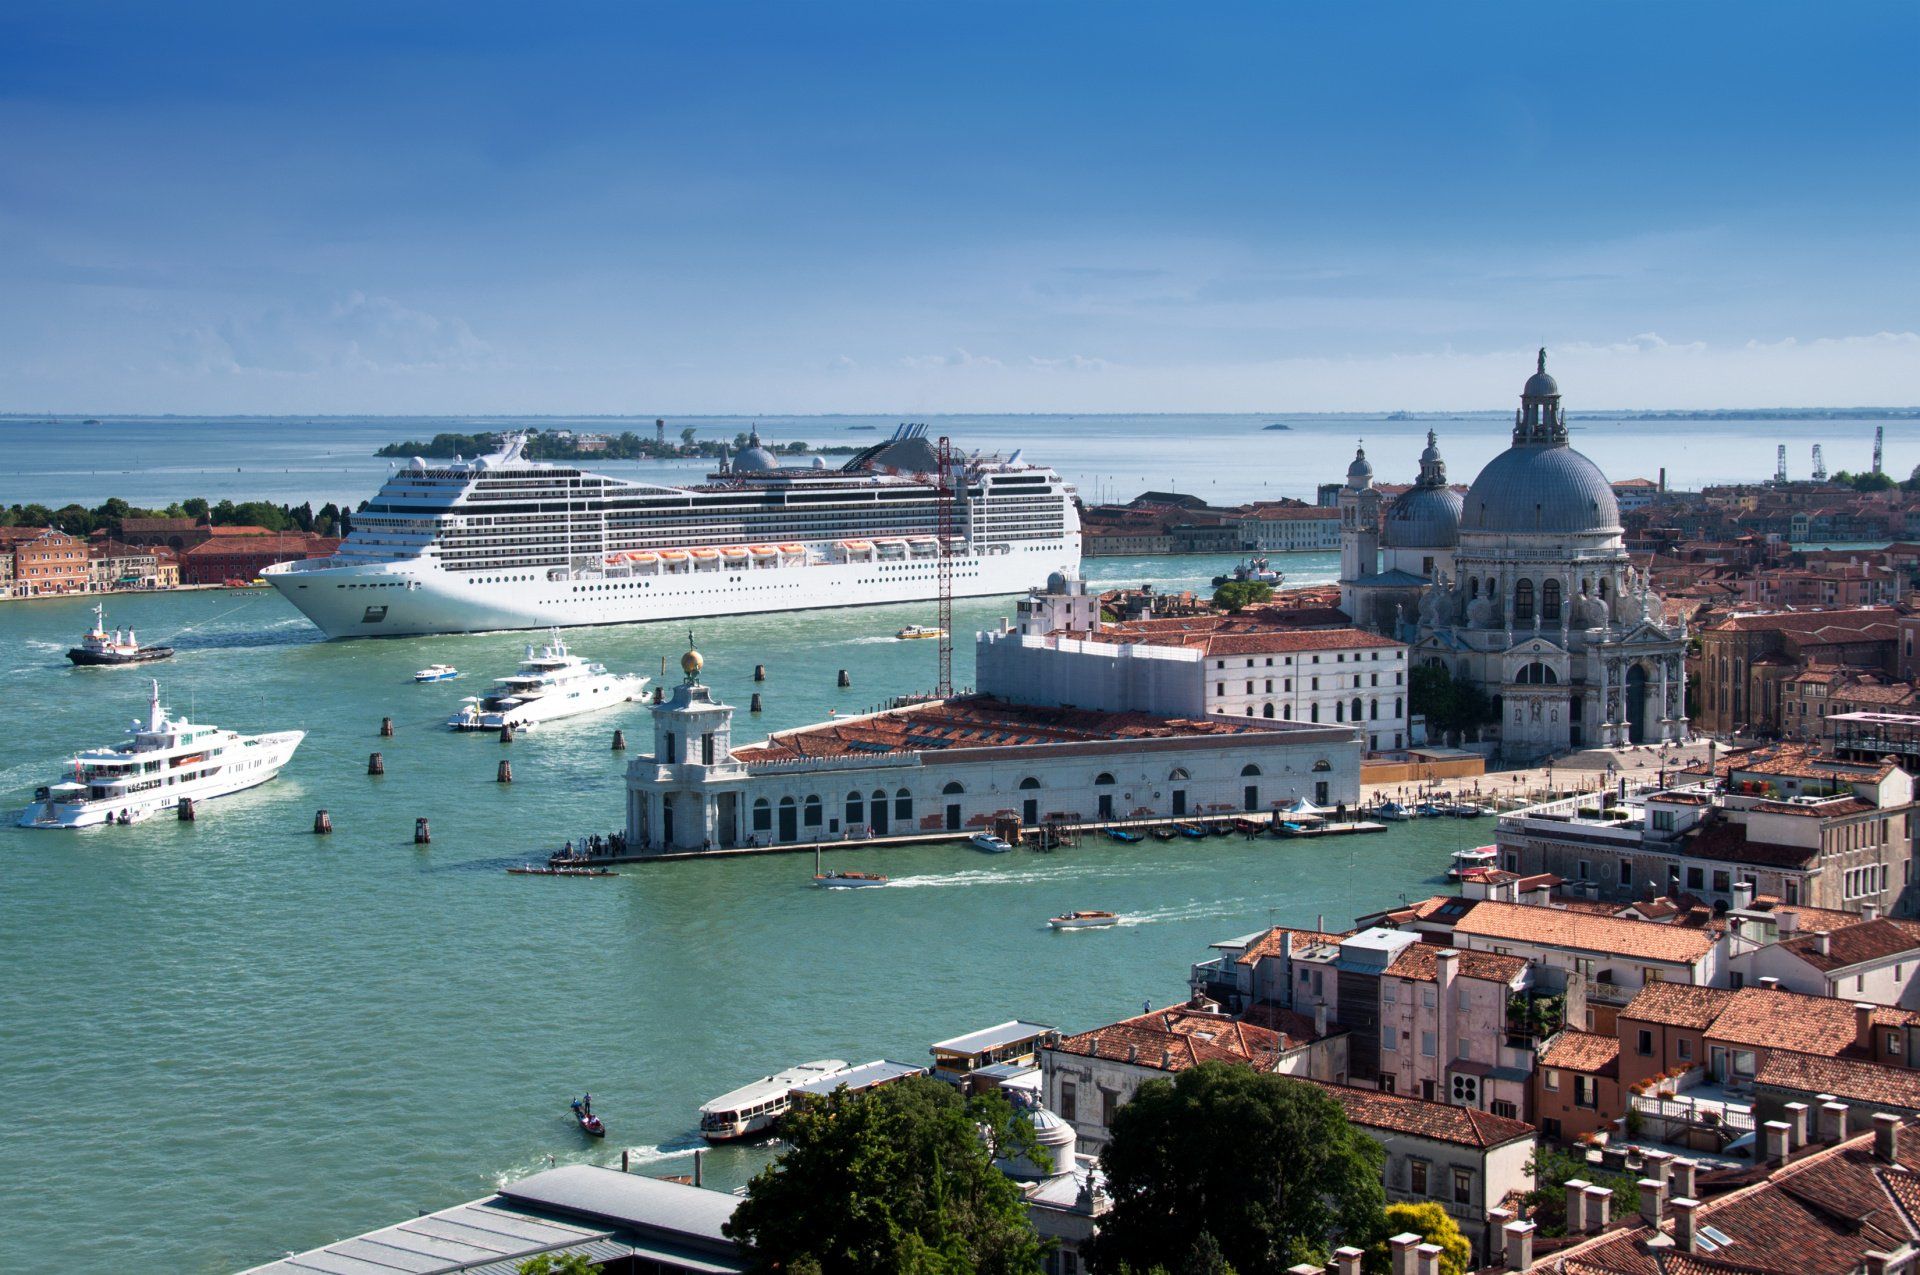 A Cruise ship visiting Venice the city of romantic gondolas on the canals.